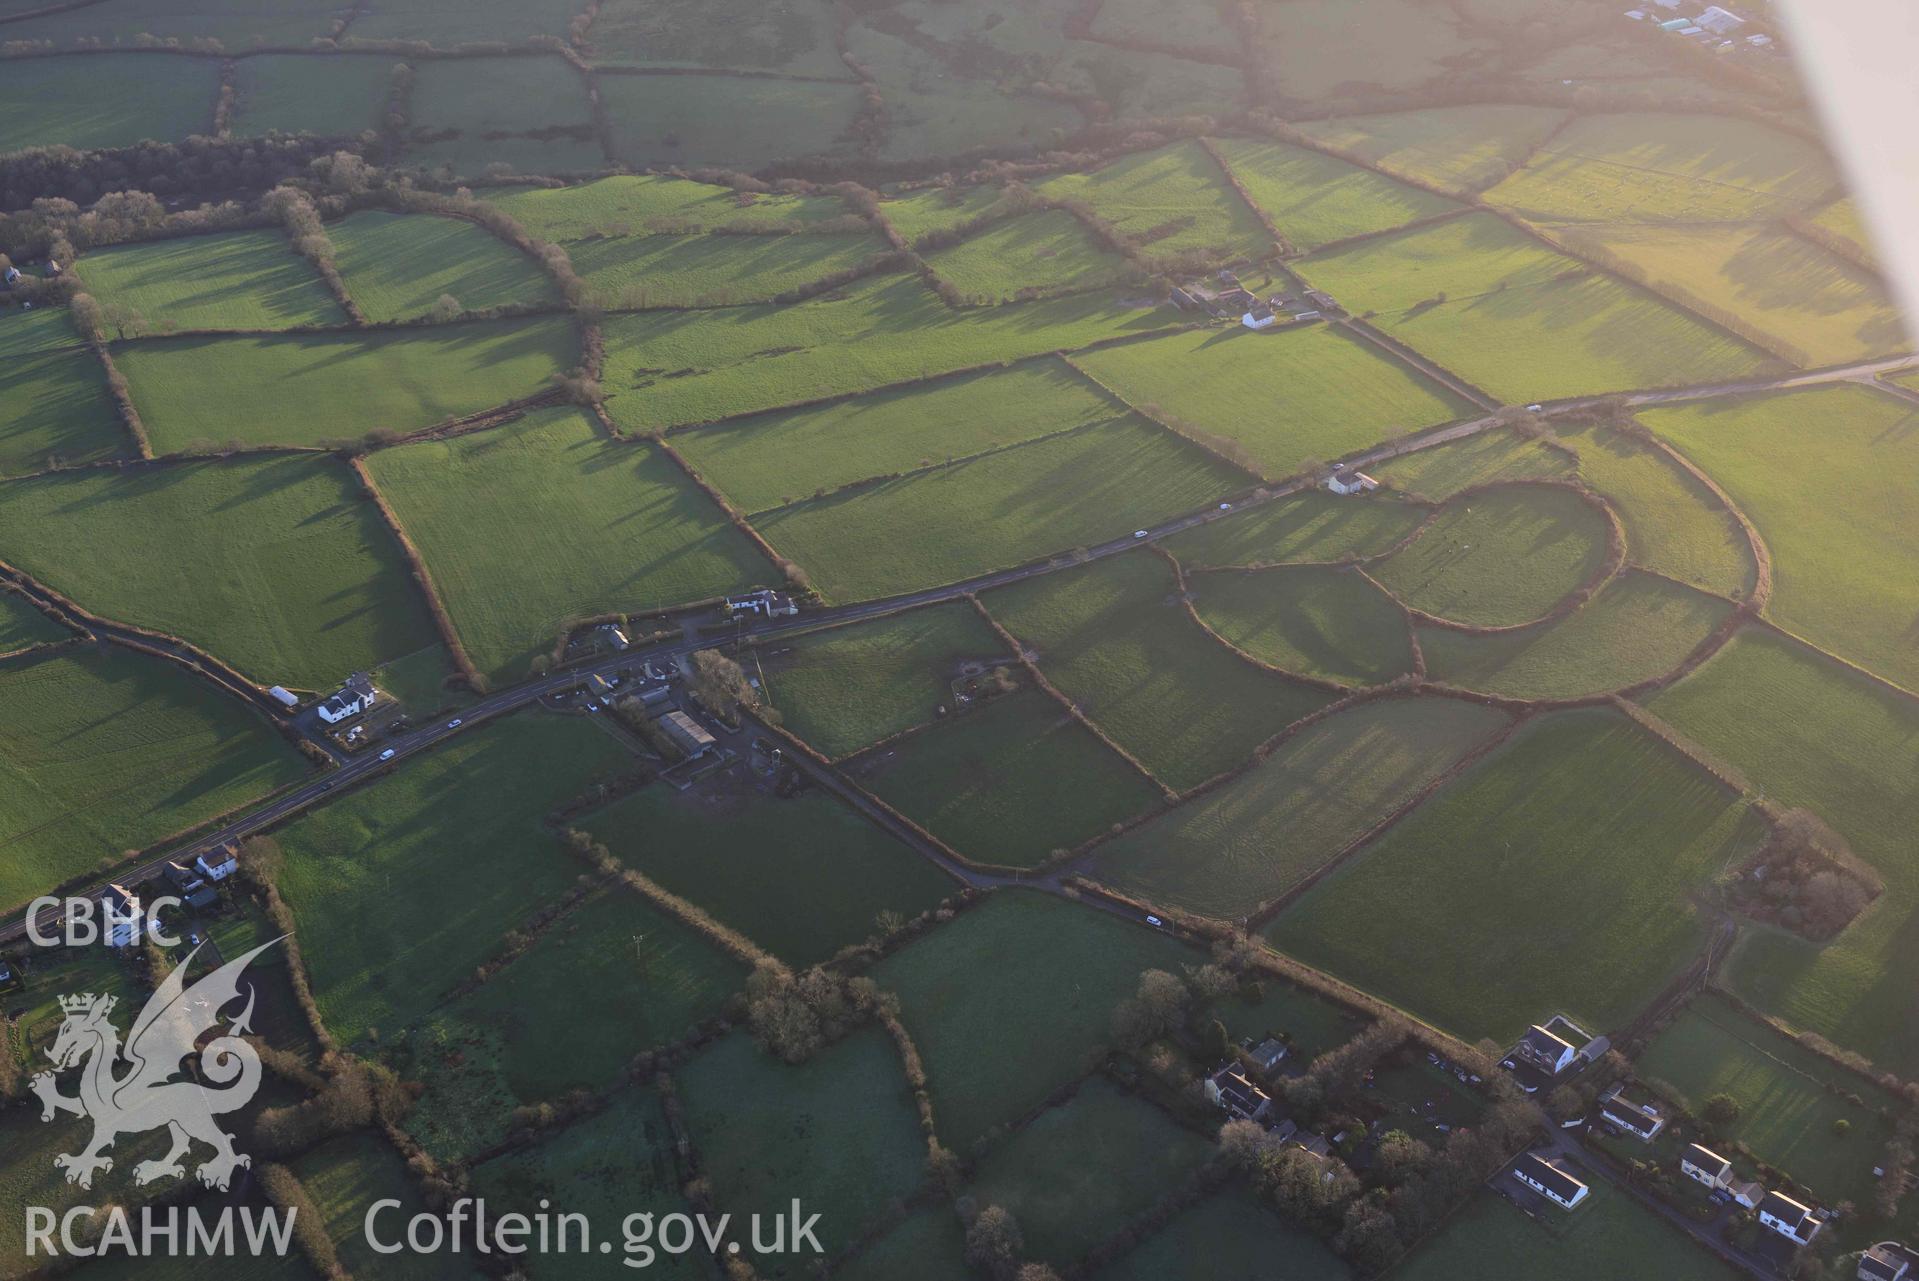 Oblique aerial photograph of Castell Nadolig hillfort, view from north east in low winter light. Taken during the Royal Commission